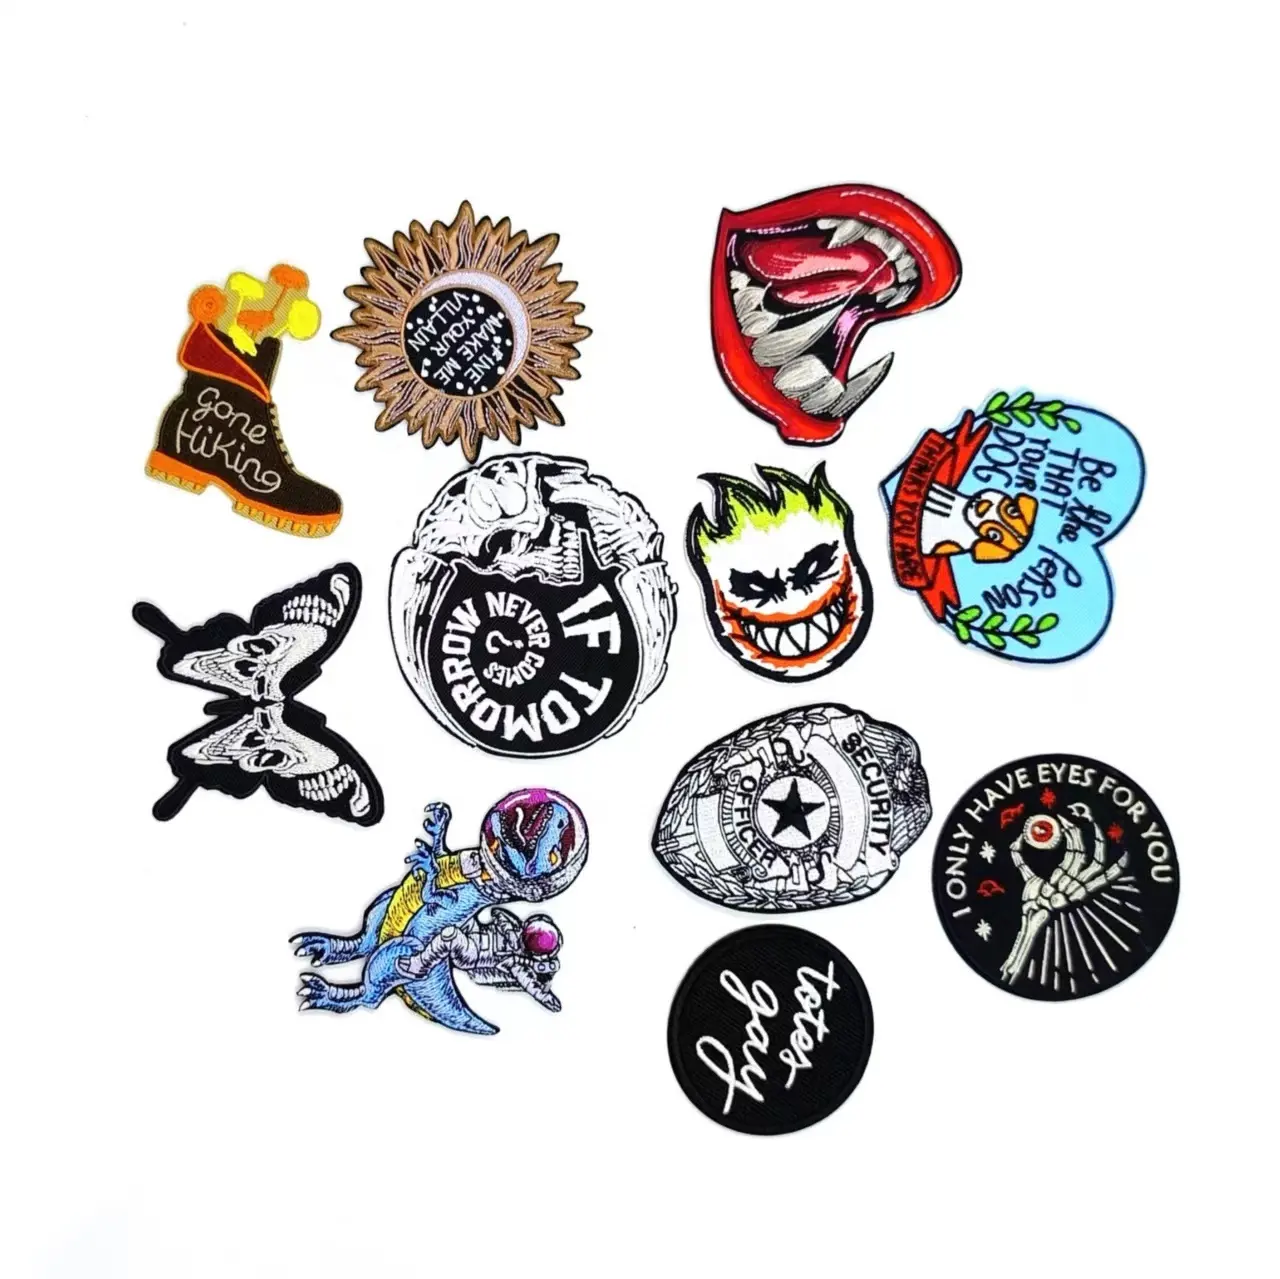 Tianyu Skull Goth Rock Punk Patch Set Iron on Sew on Halloween Decoration Embroidery Patches for Jackets Hats Clothing Bags